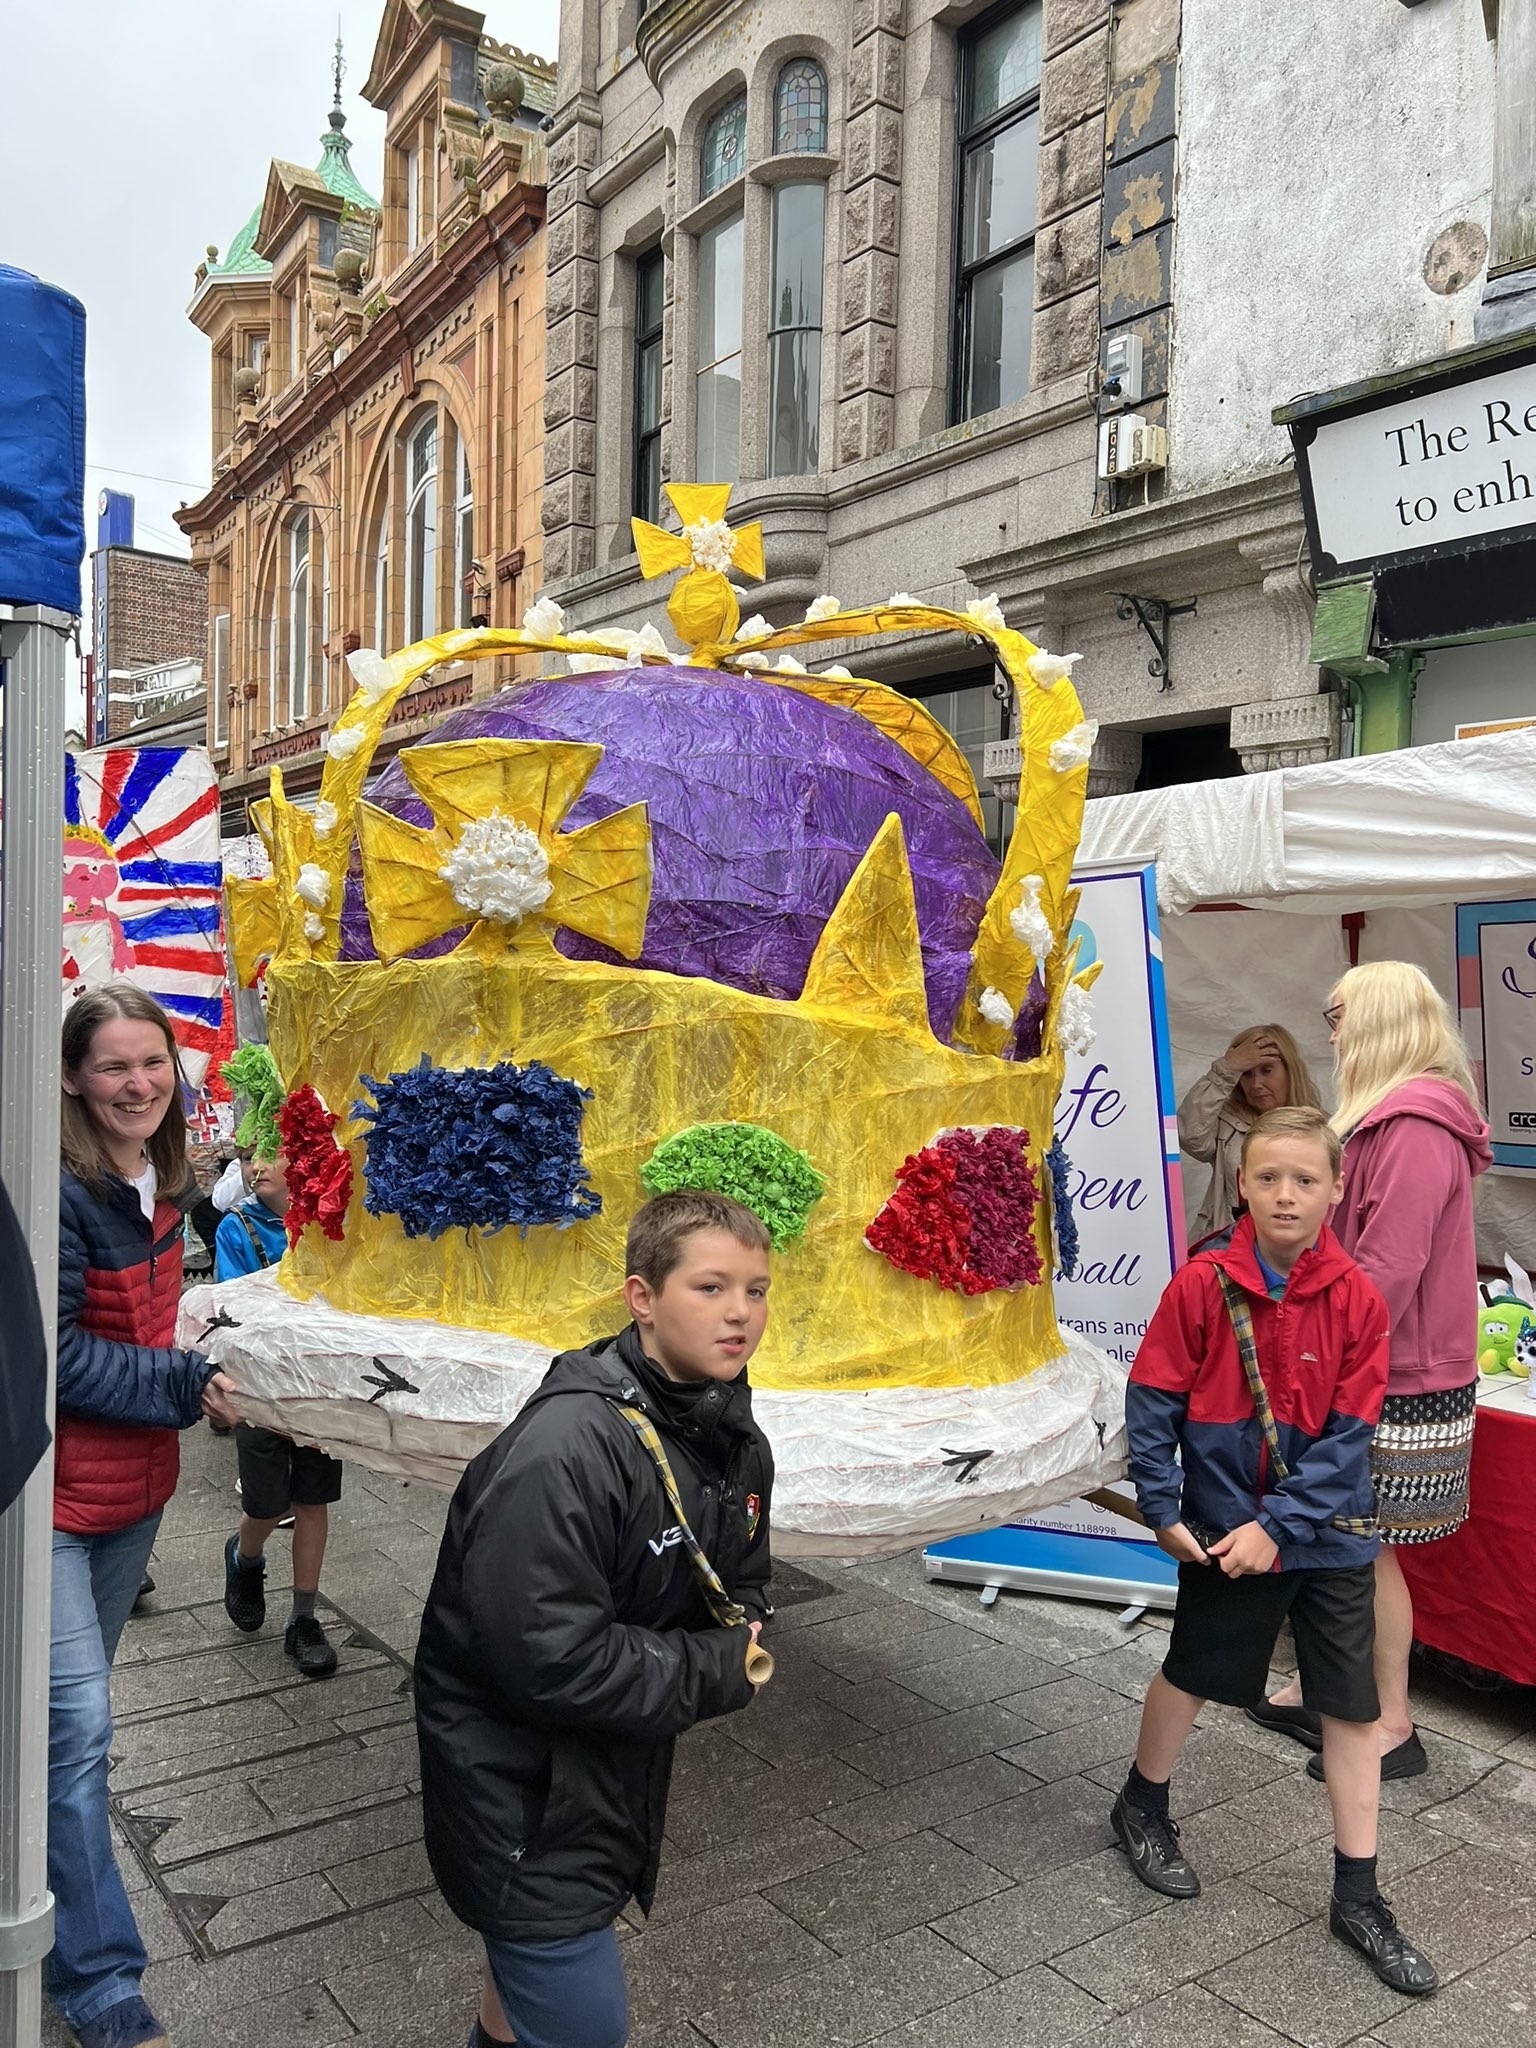 A giant papier mache crown is carried through town Picture: Pauline Giles